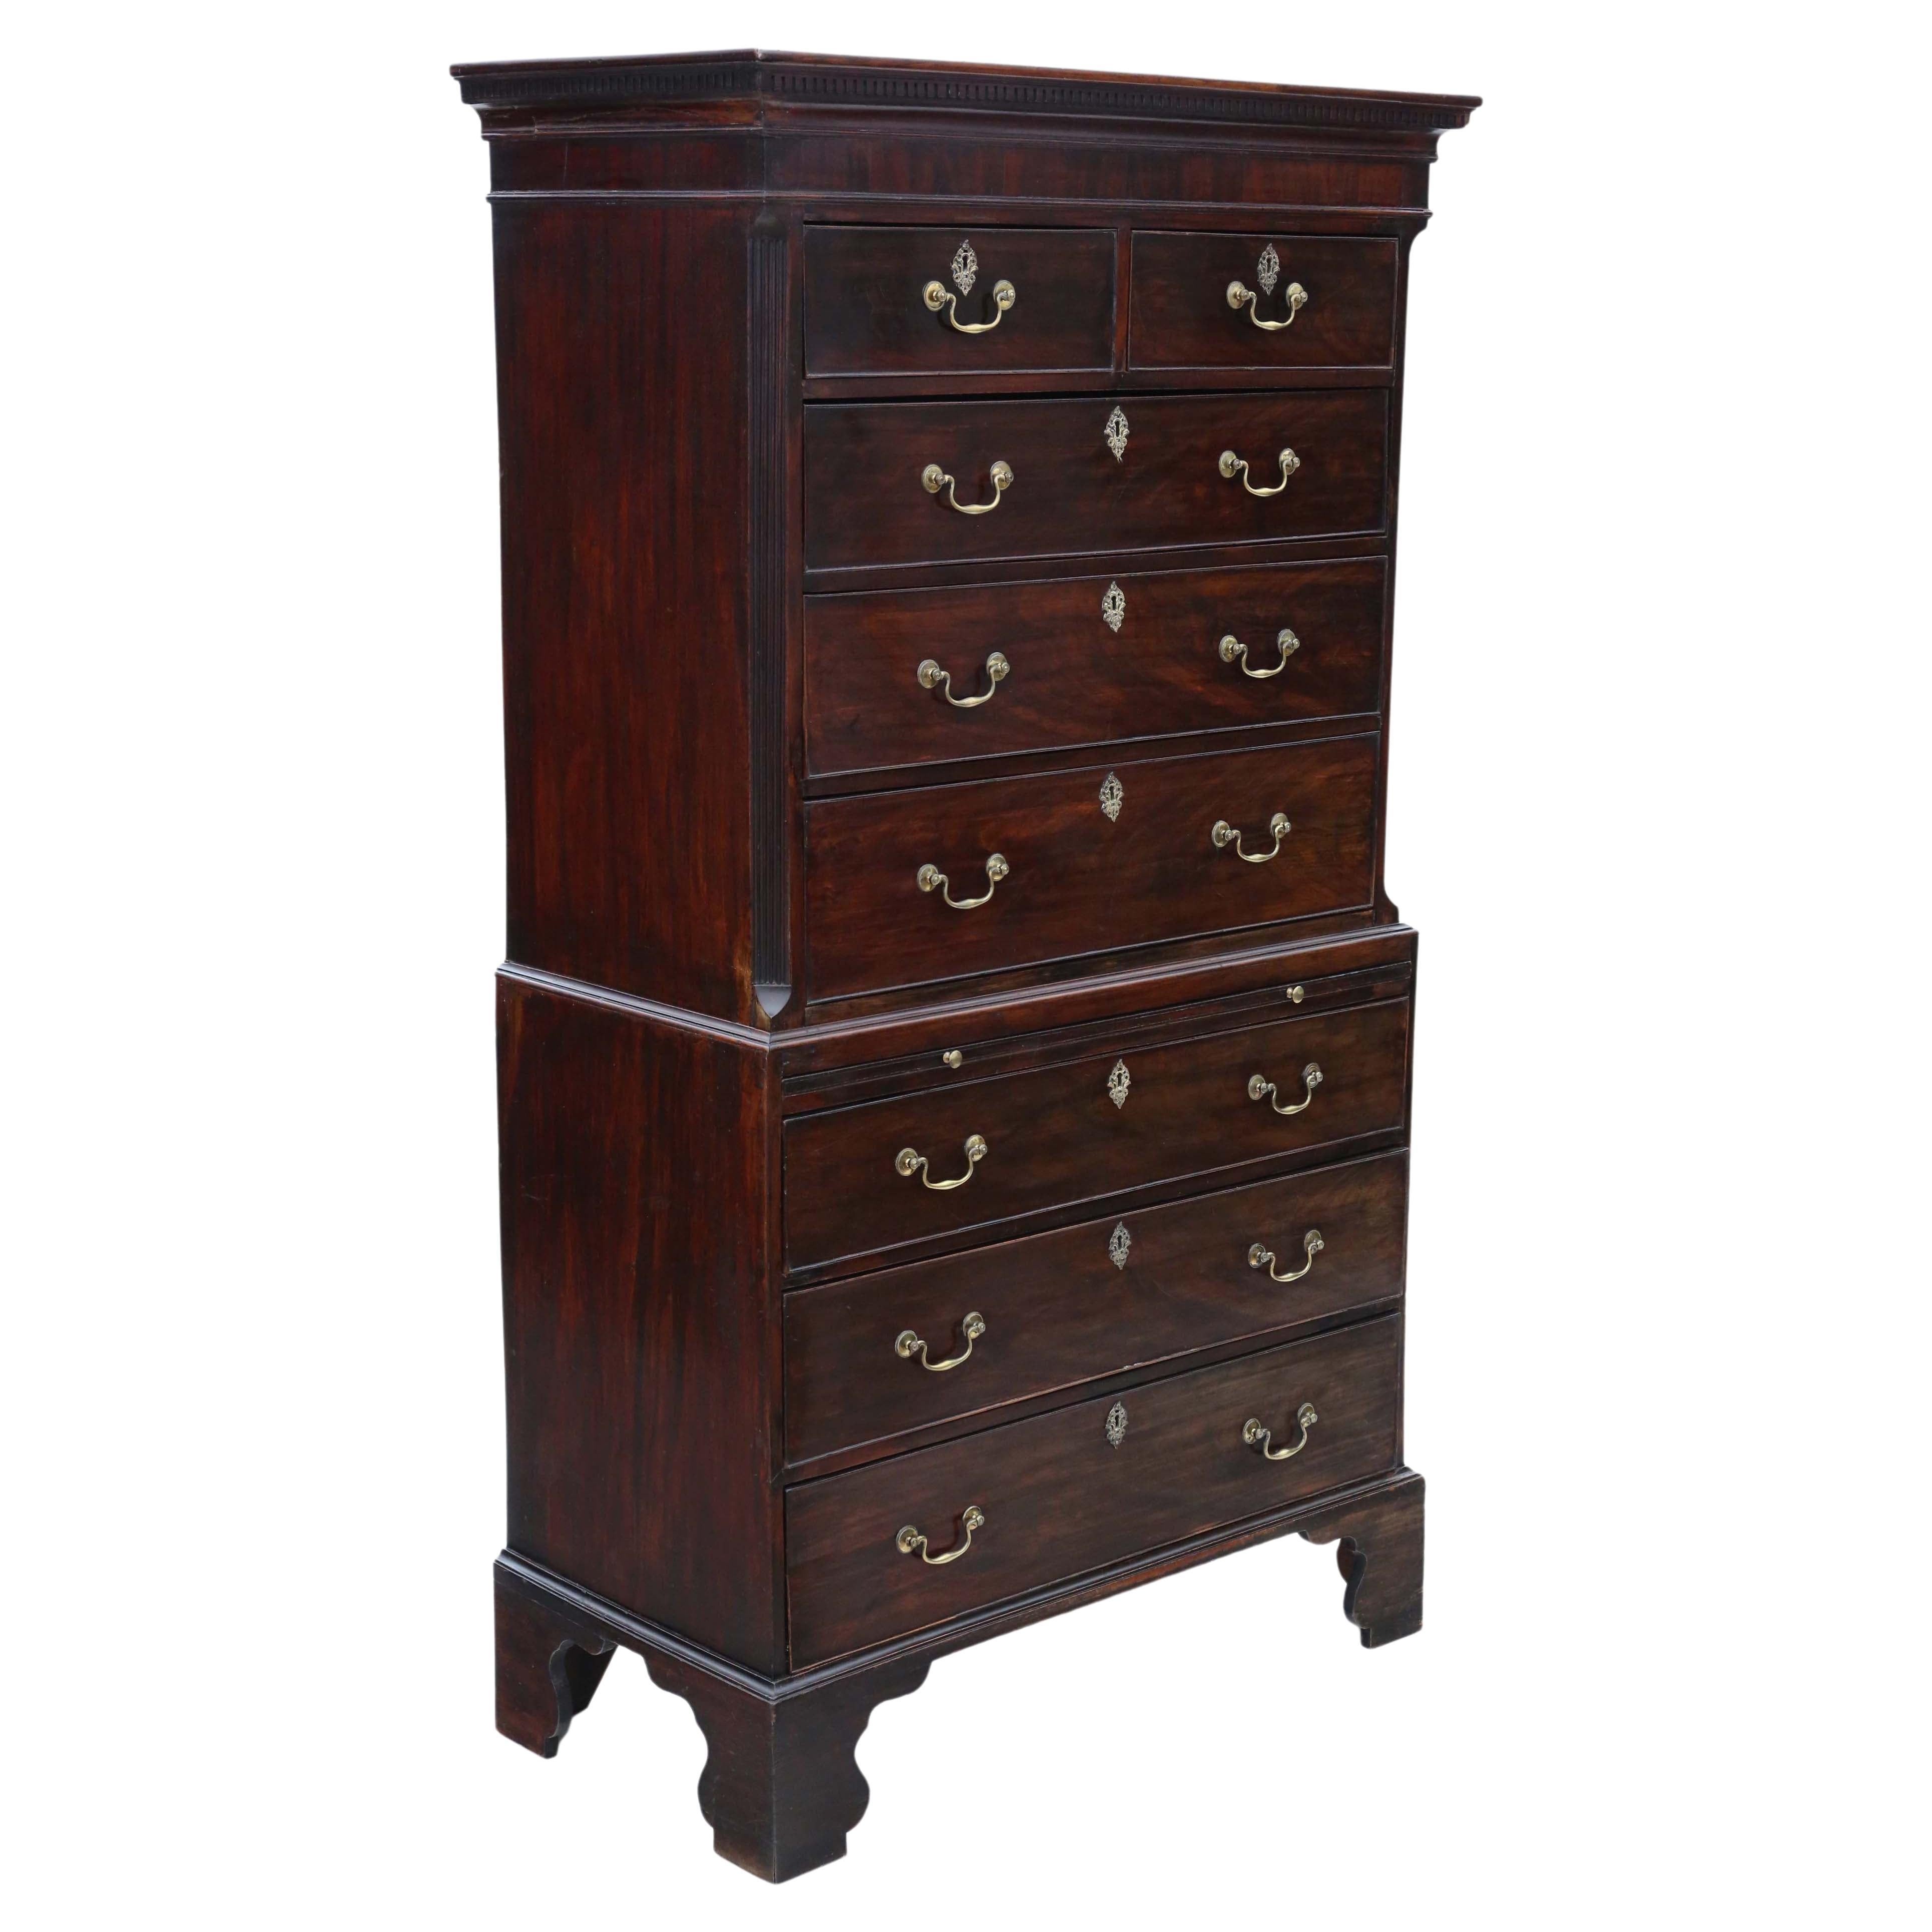 Antique 18th Century mahogany tallboy chest on chest of drawers